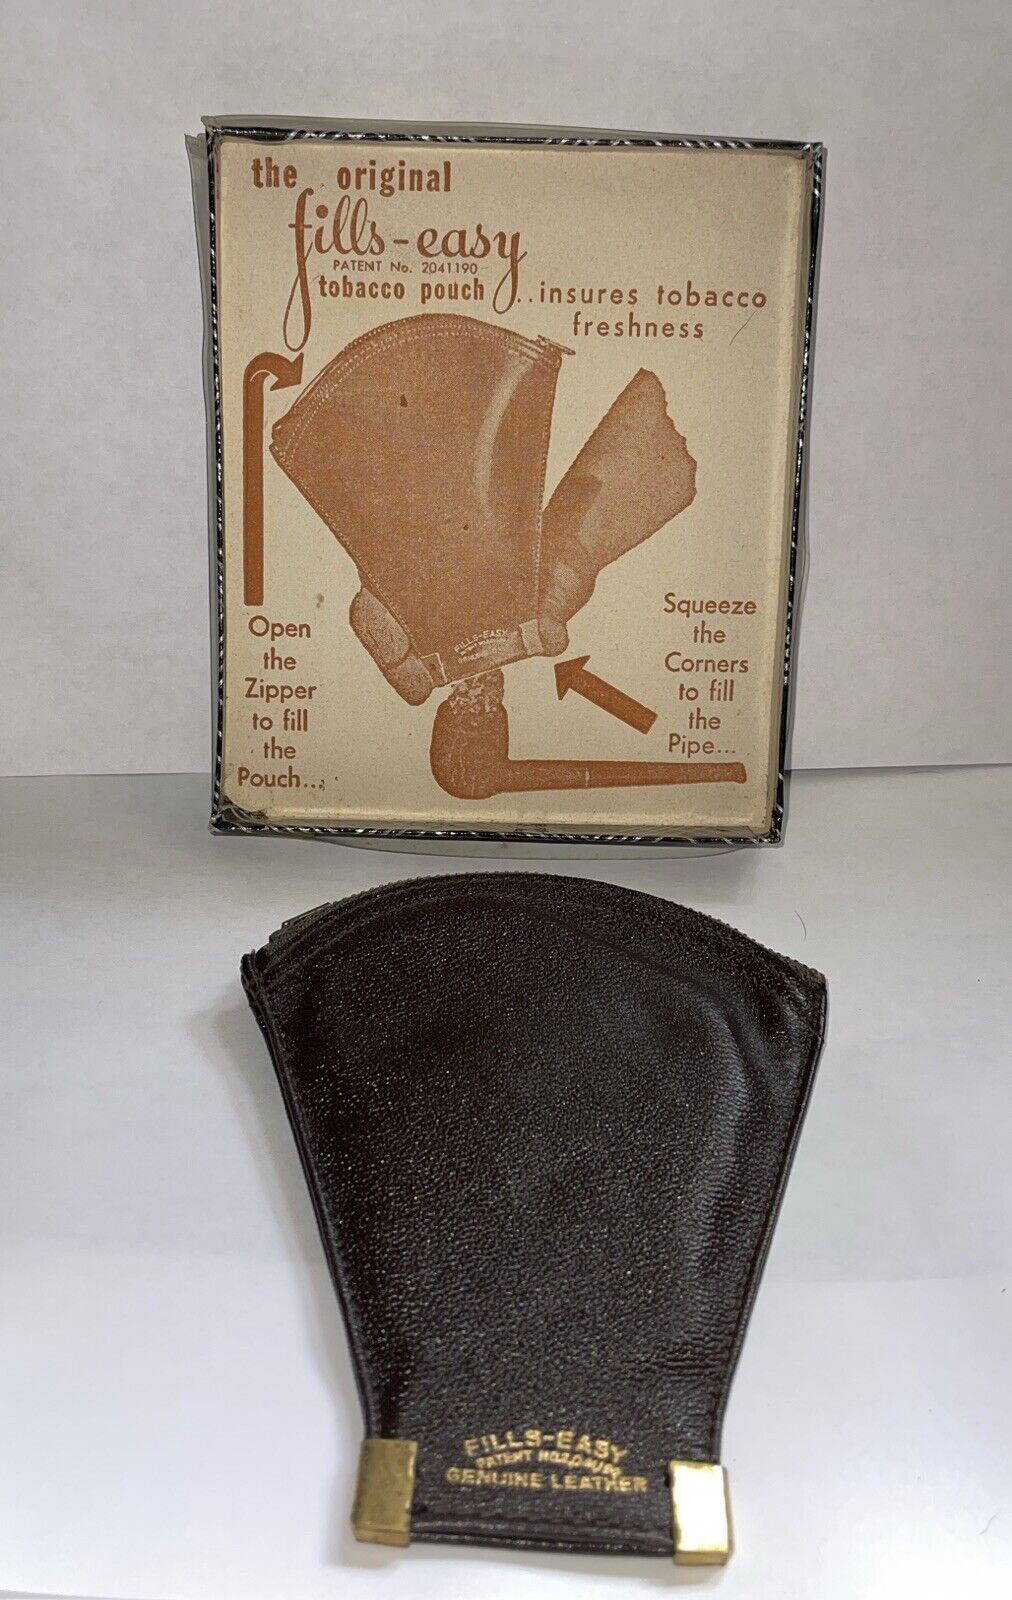 Vintage NOS  Rogers Genuine Leather Tobacco Pouch  ORIGINAL FILLS EASY PAT PENT